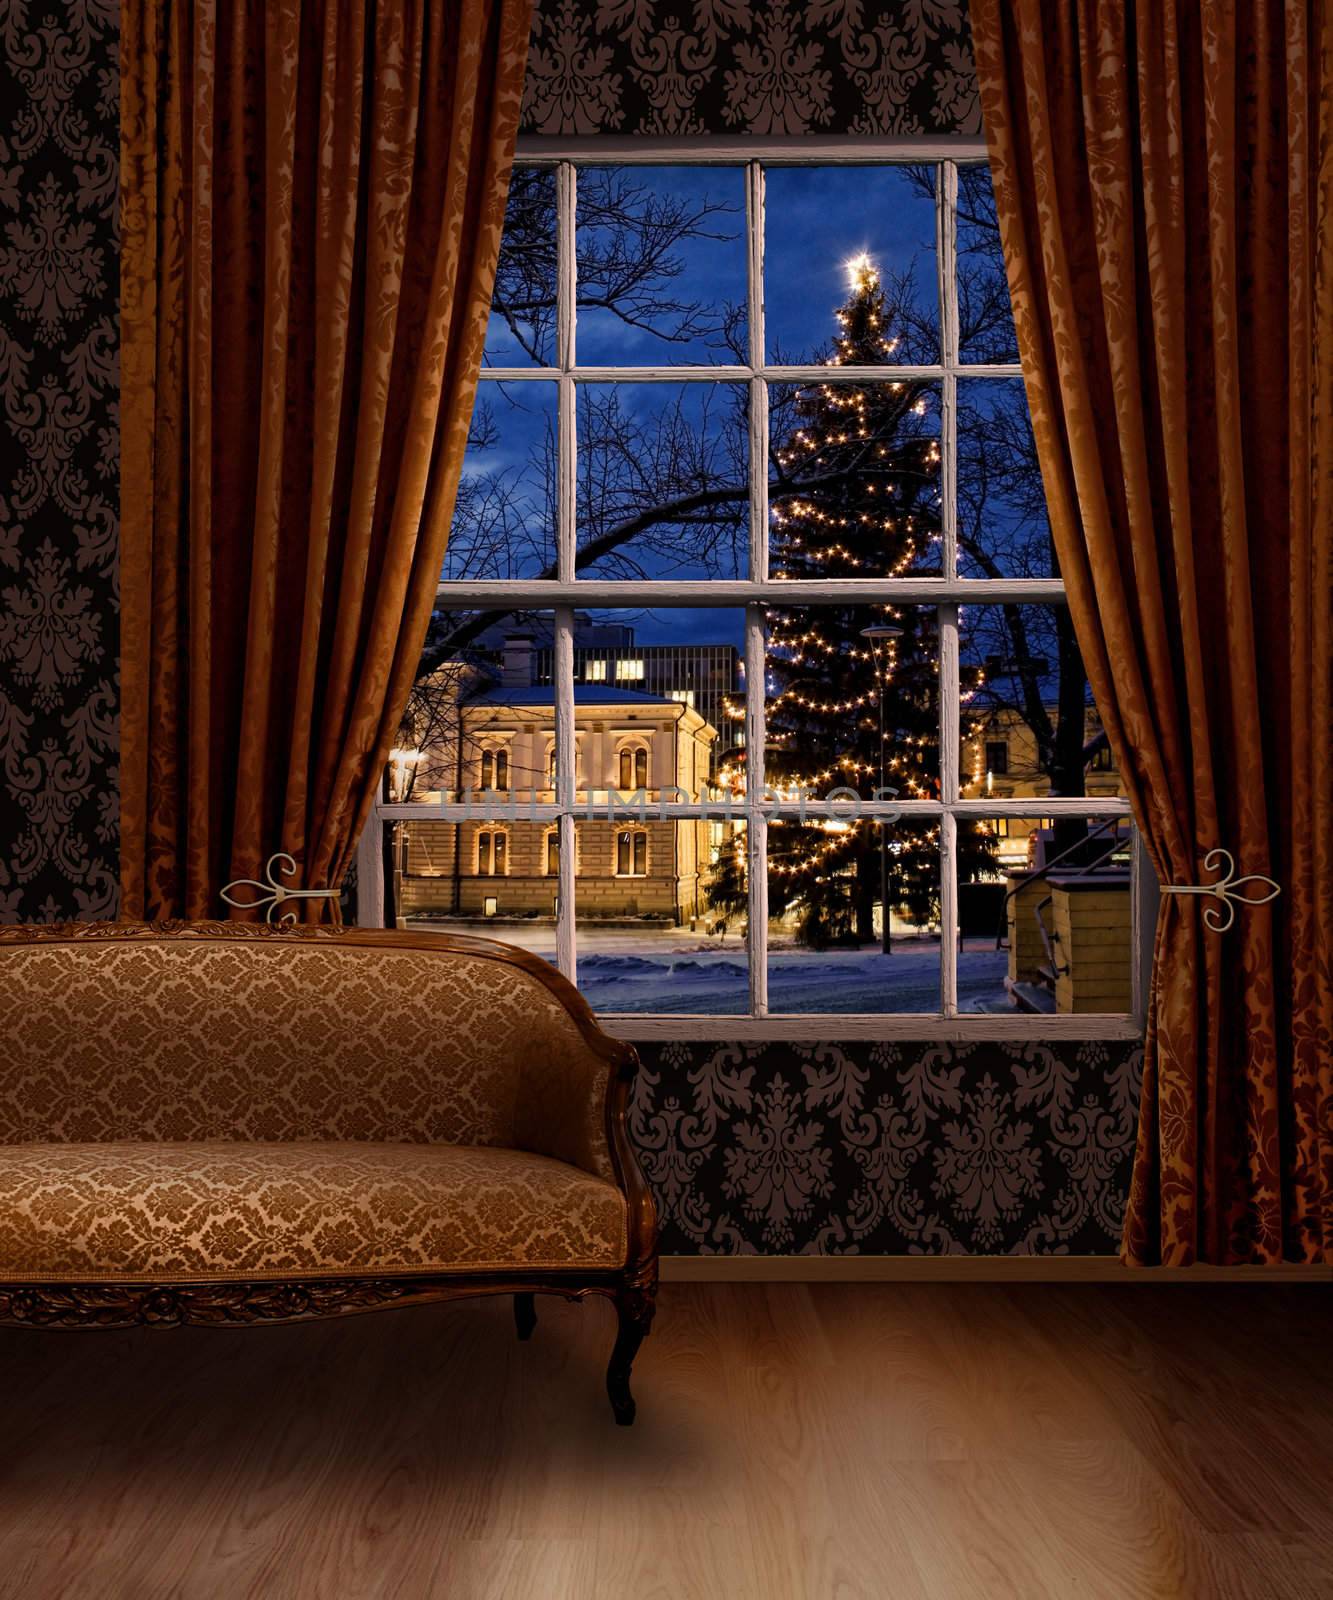 Christmas town view window from classic furniture interior room